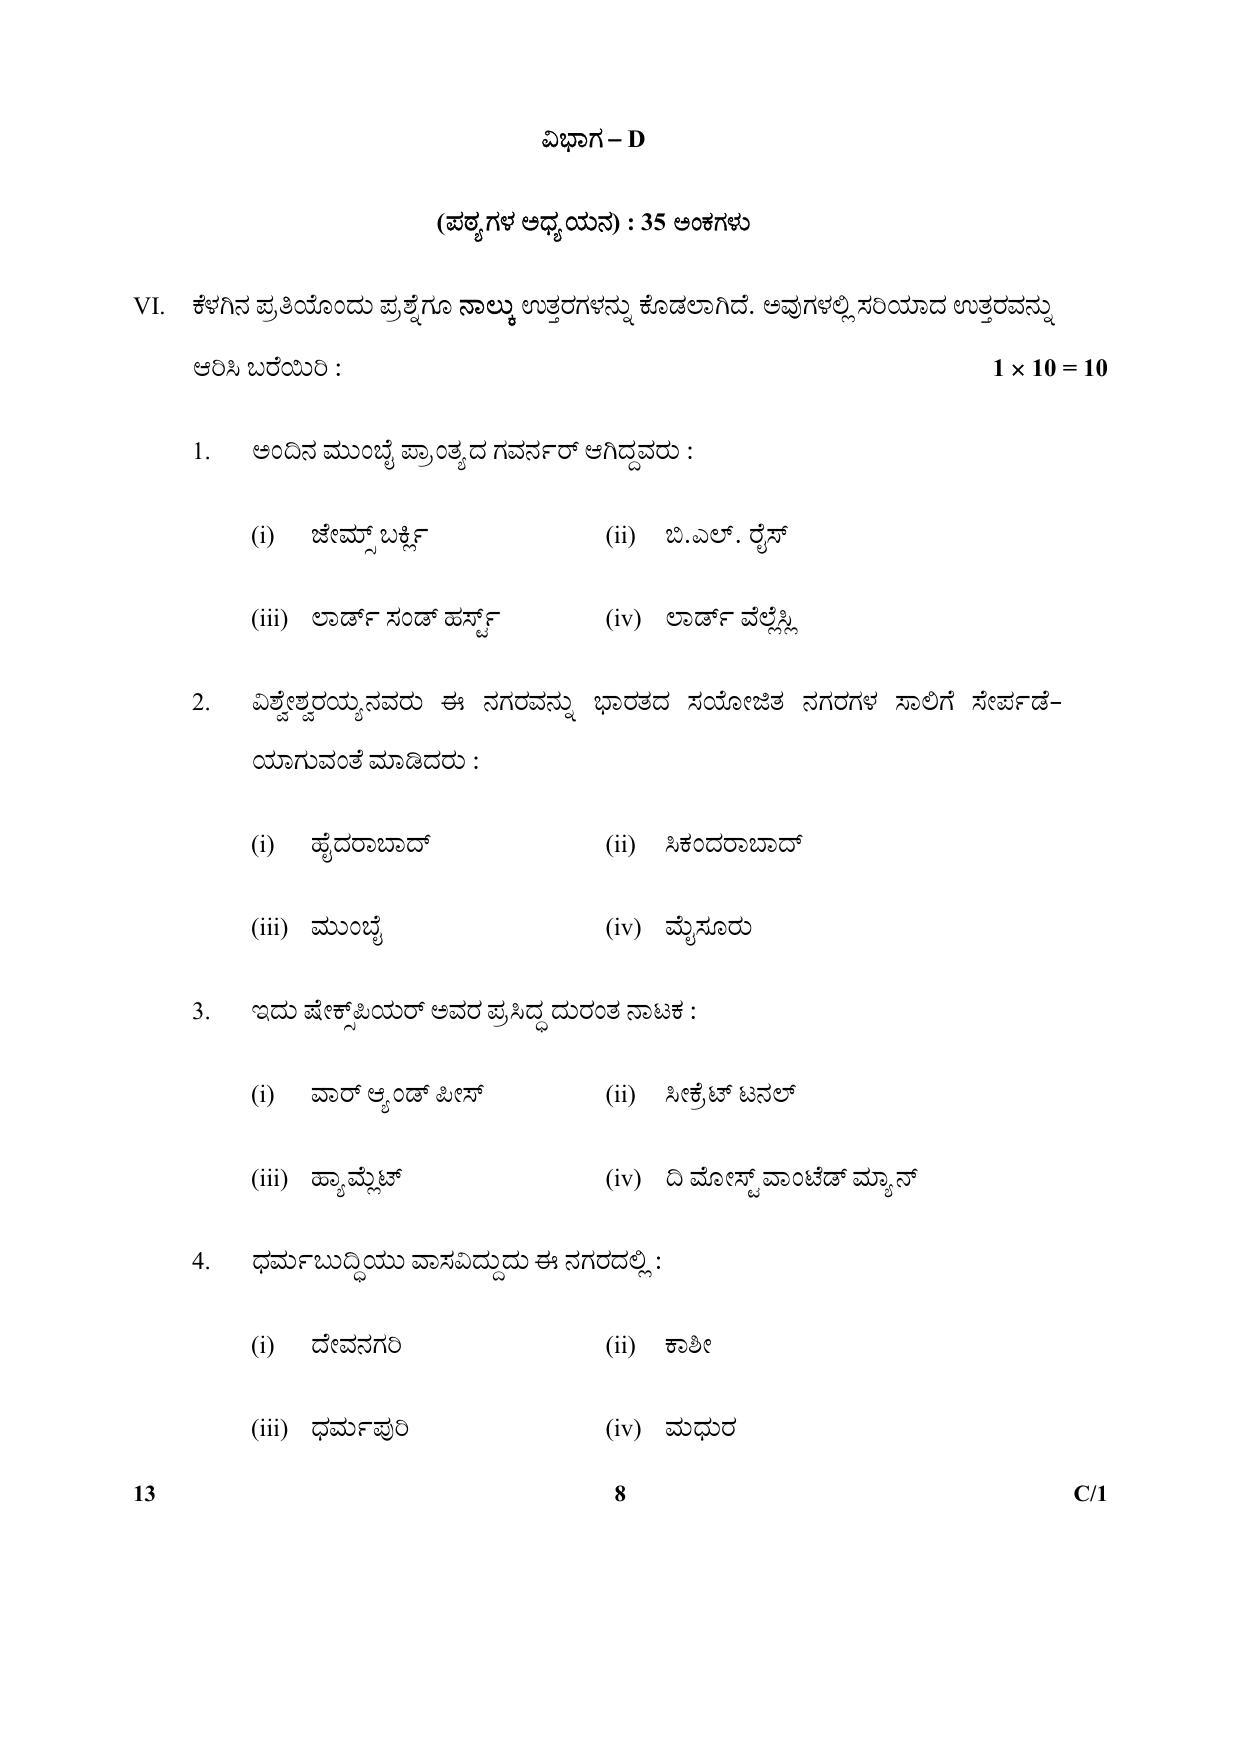 CBSE Class 10 13 (Kannada) 2018 Compartment Question Paper - Page 8